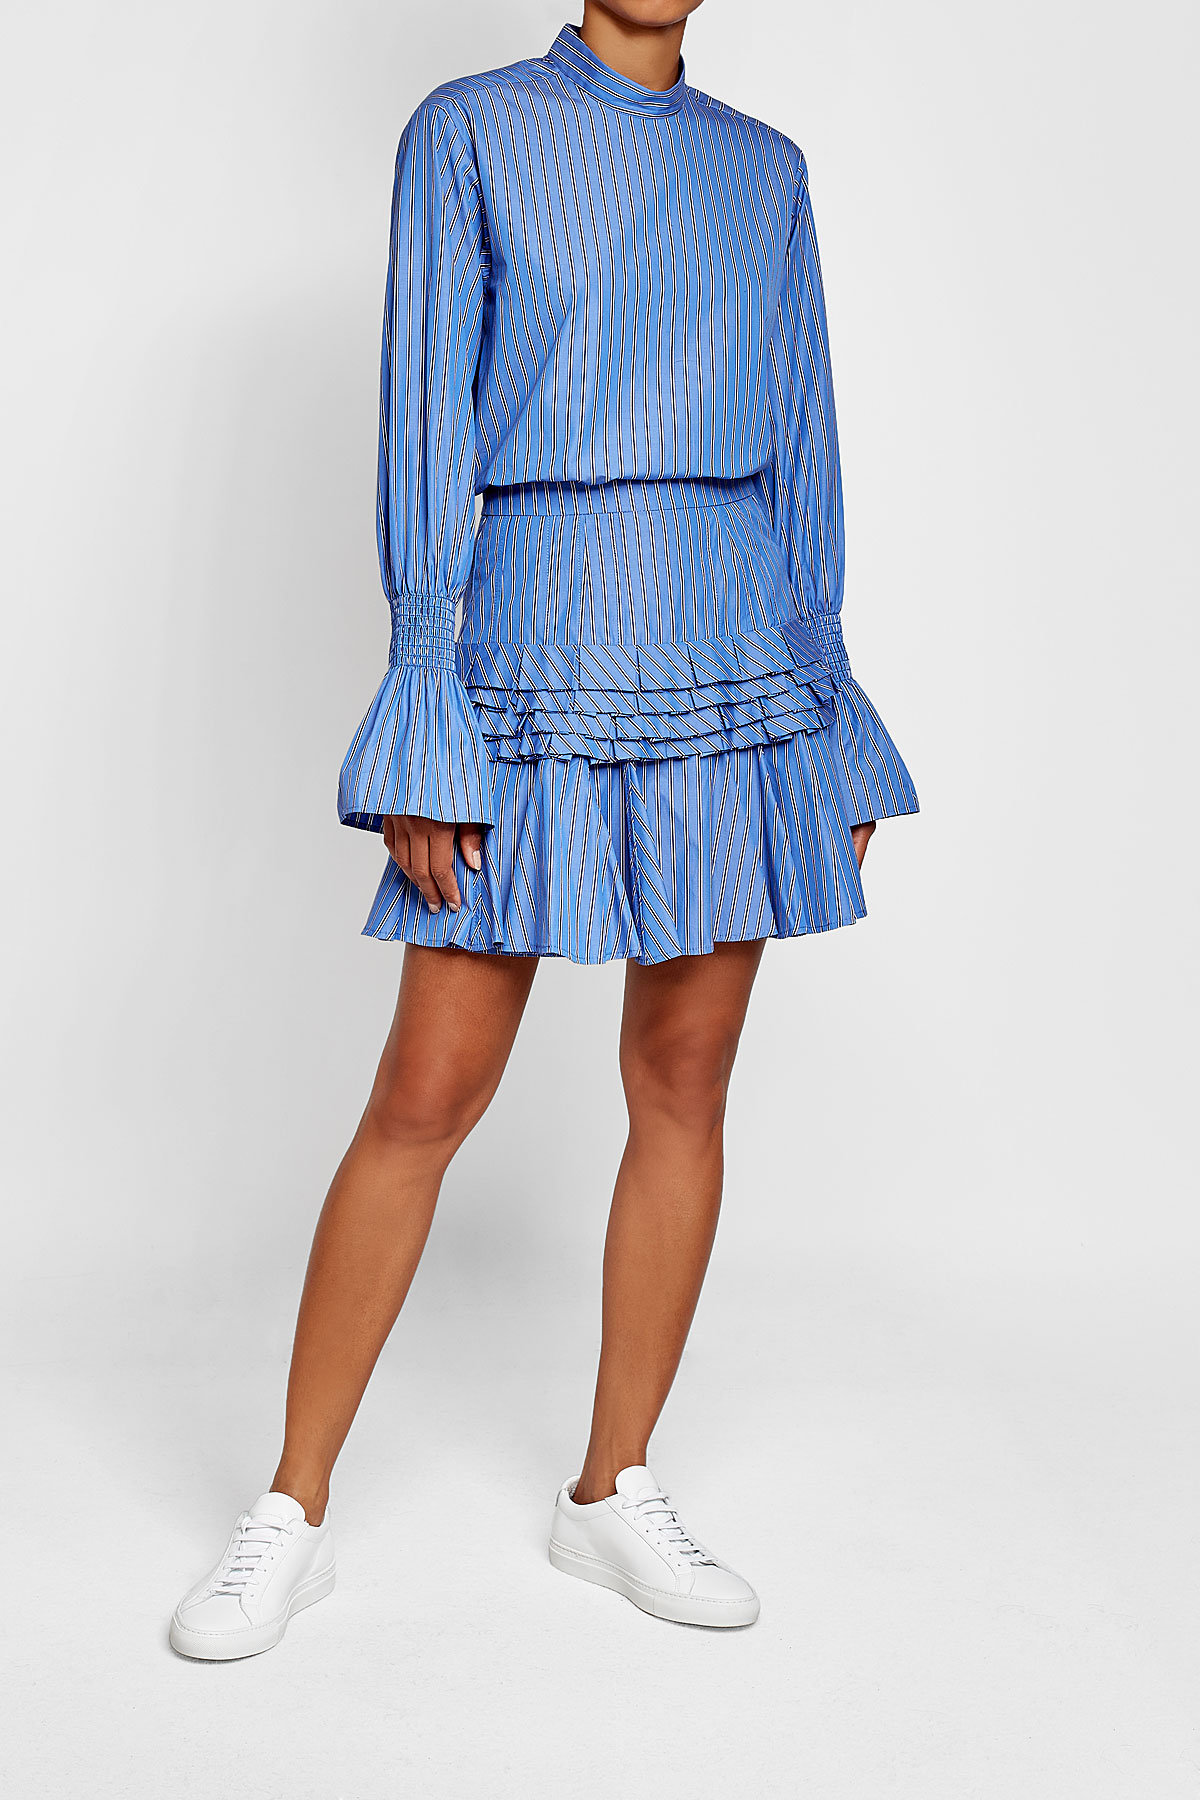 maggie marilyn Striped Cotton Shirt with Statement Cuffs - image via Stylebop.com